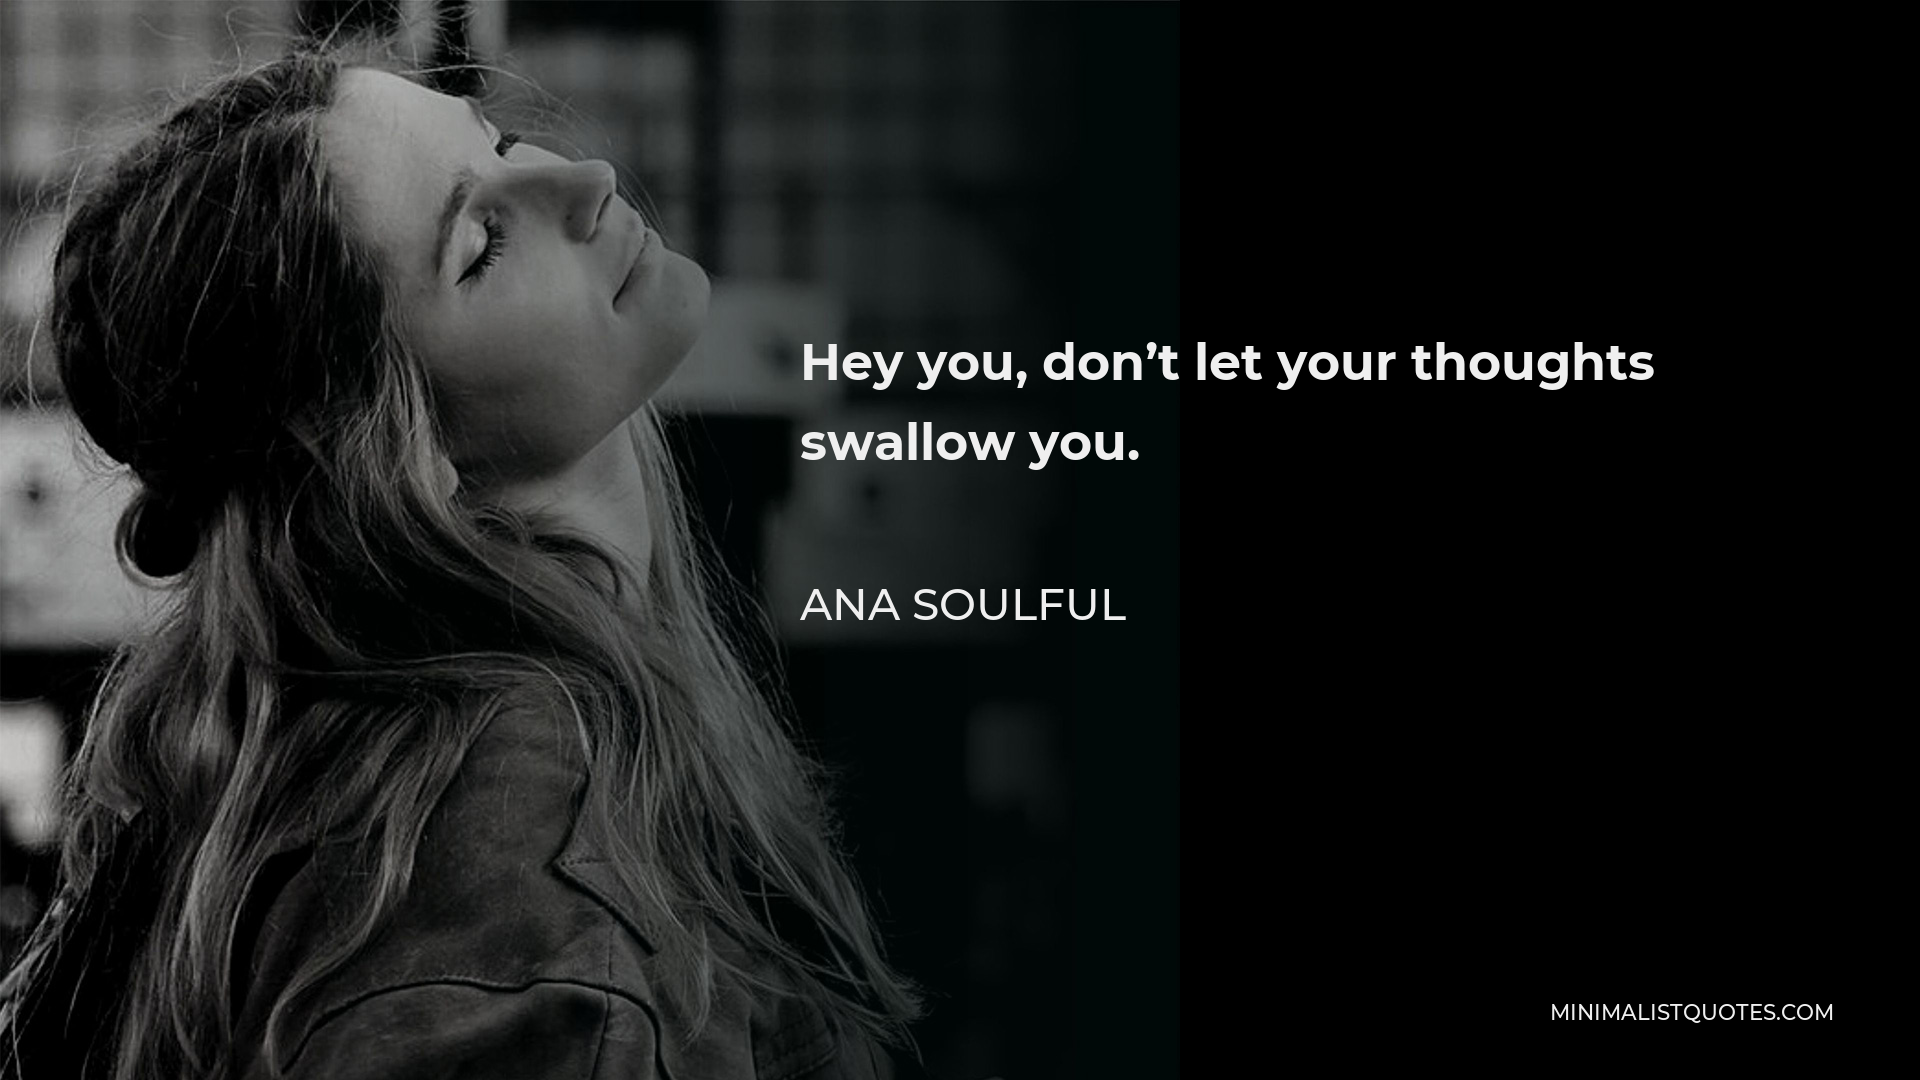 Ana Soulful Quote - Hey you, don’t let your thoughts swallow you.